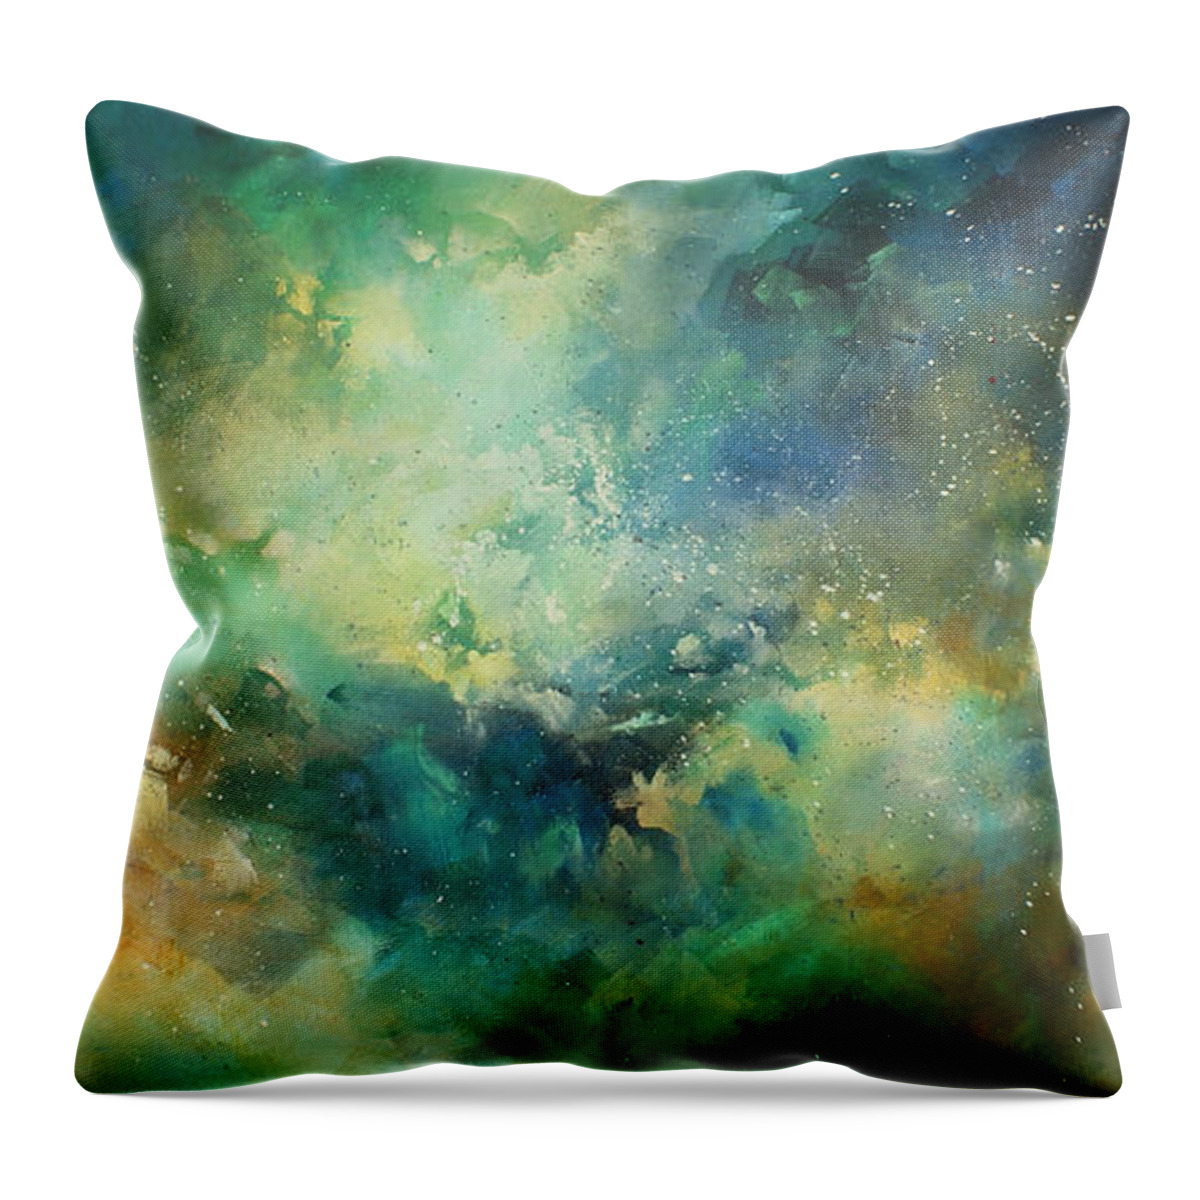 Abstract Design Throw Pillow featuring the painting 'eternity' by Michael Lang